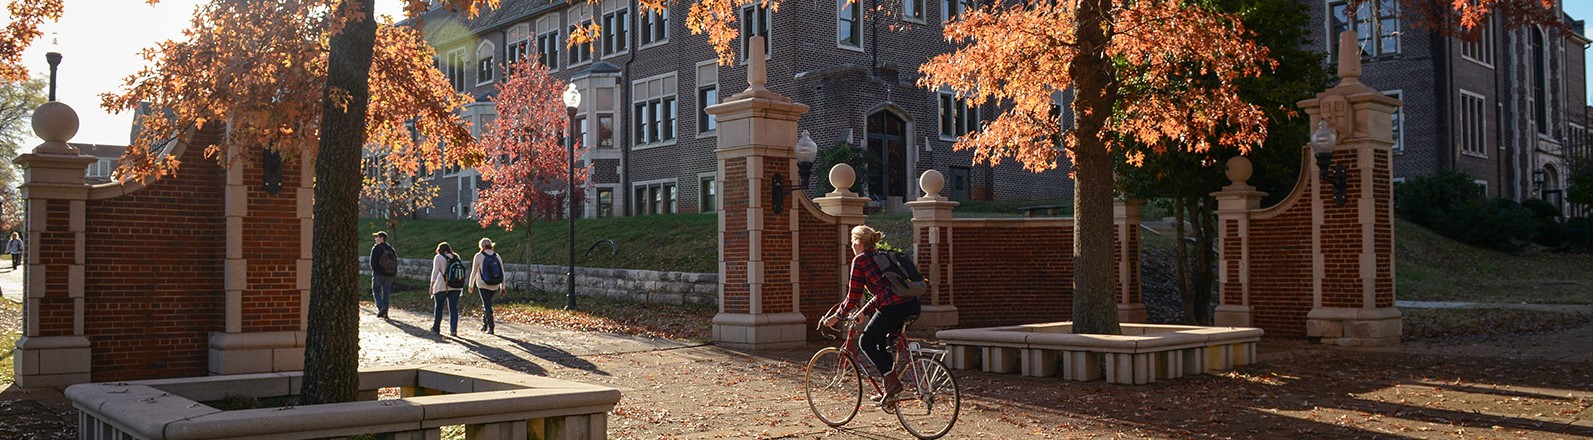 UT Chattanooga campus in the fall with bicycle rider